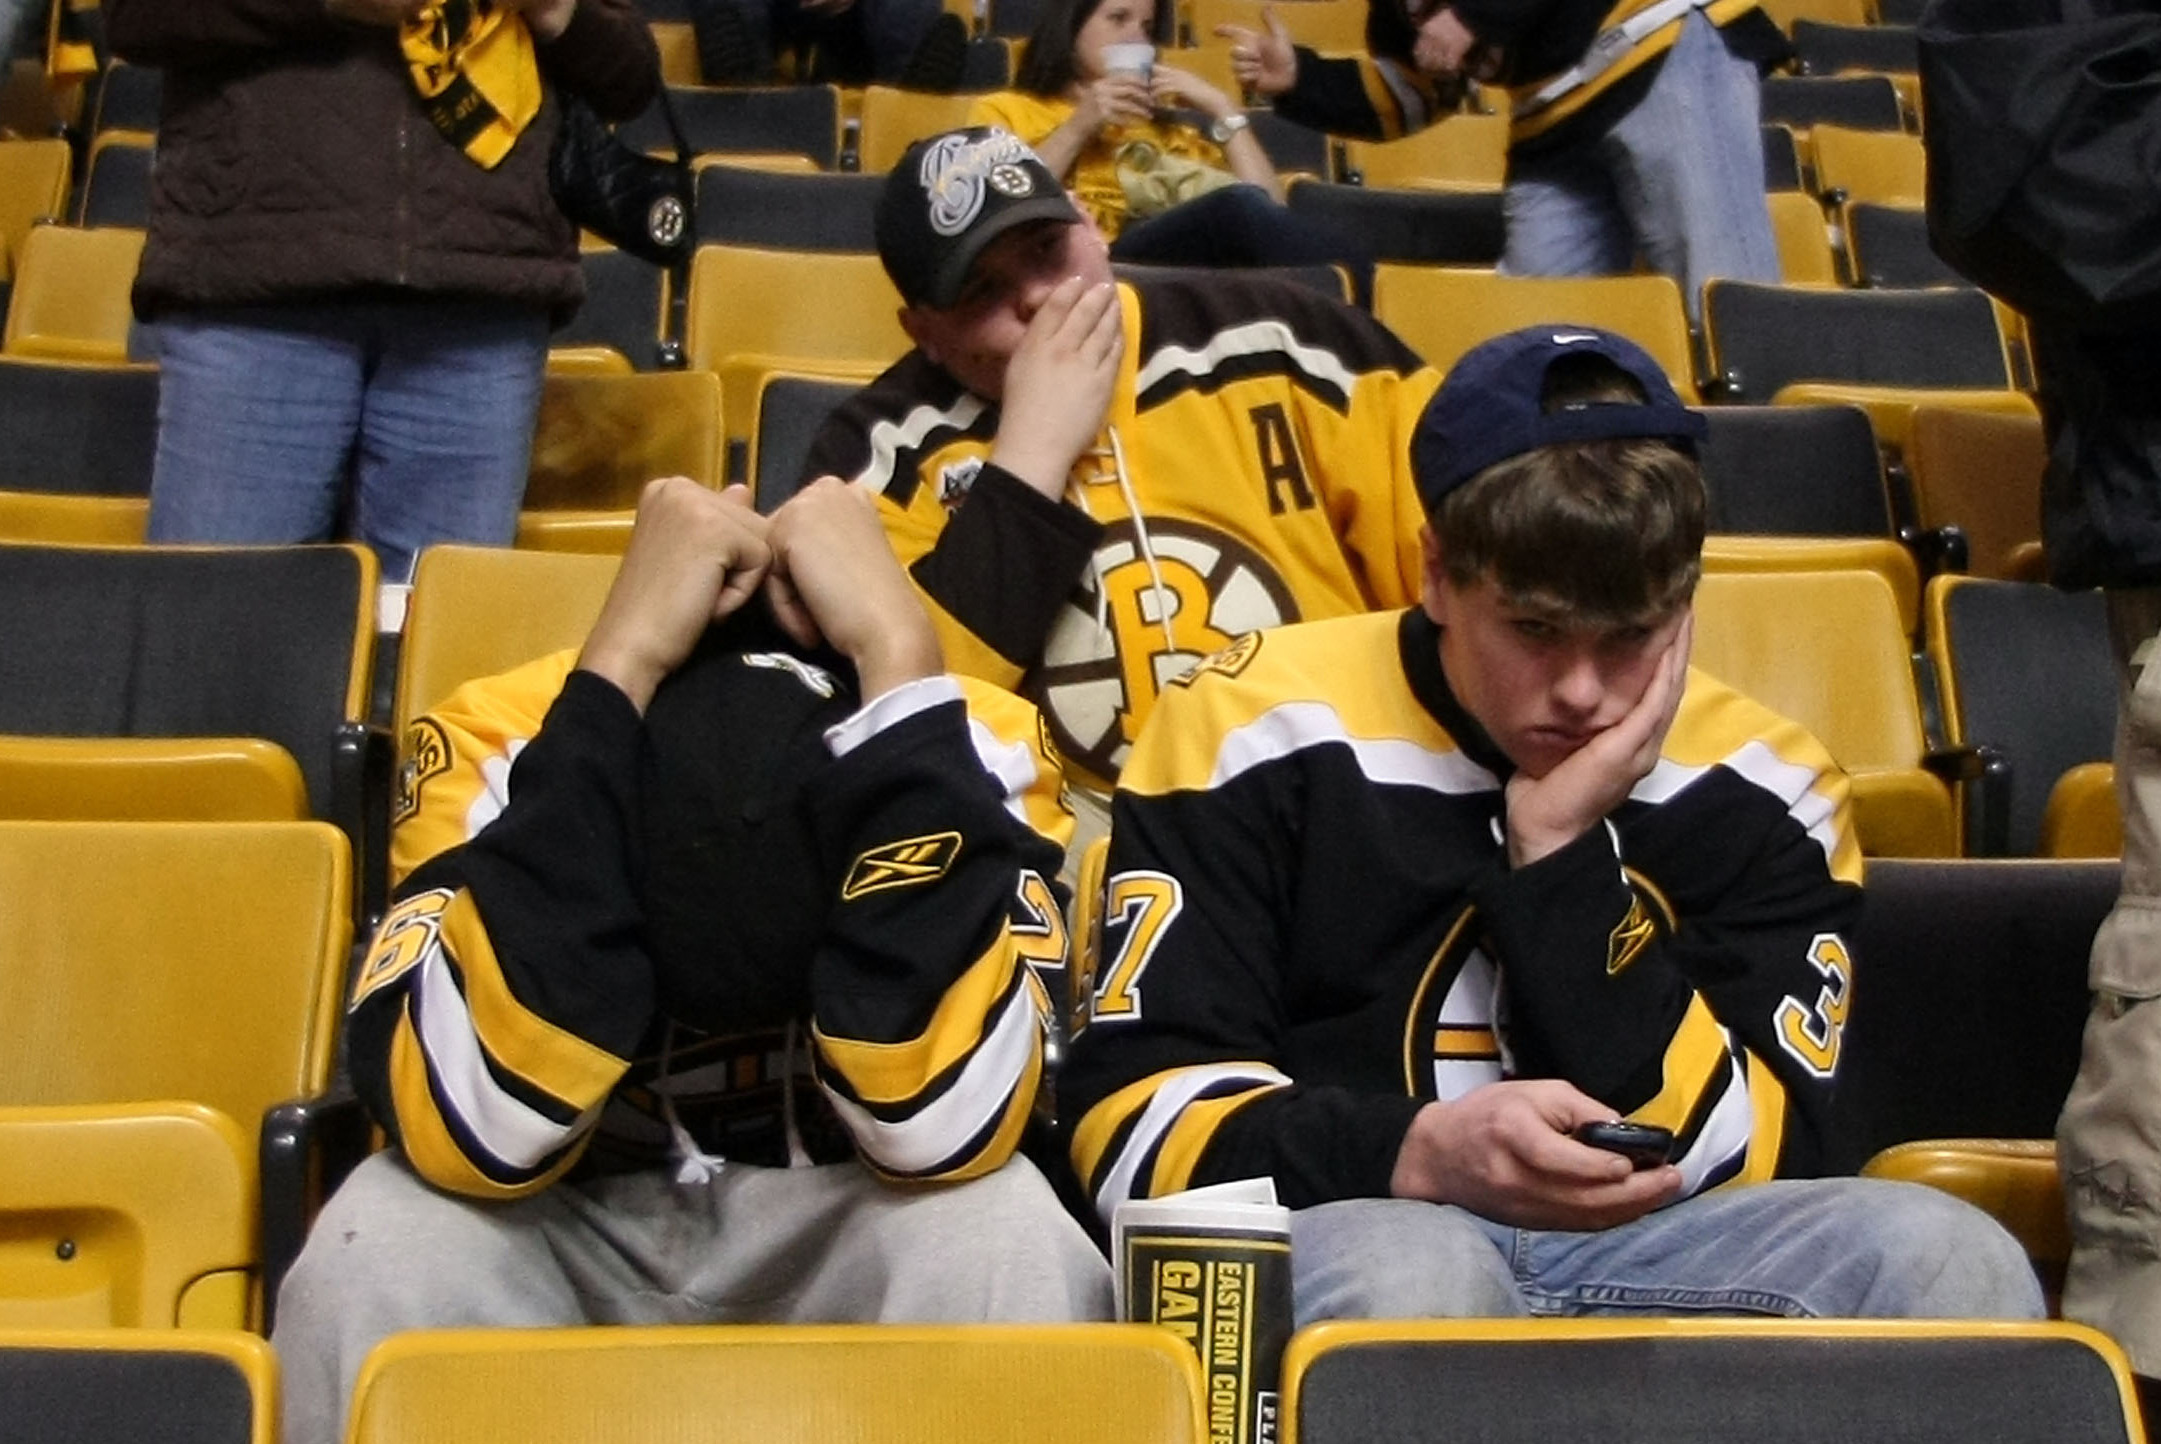 Exclusive Offers for Bruins Fans